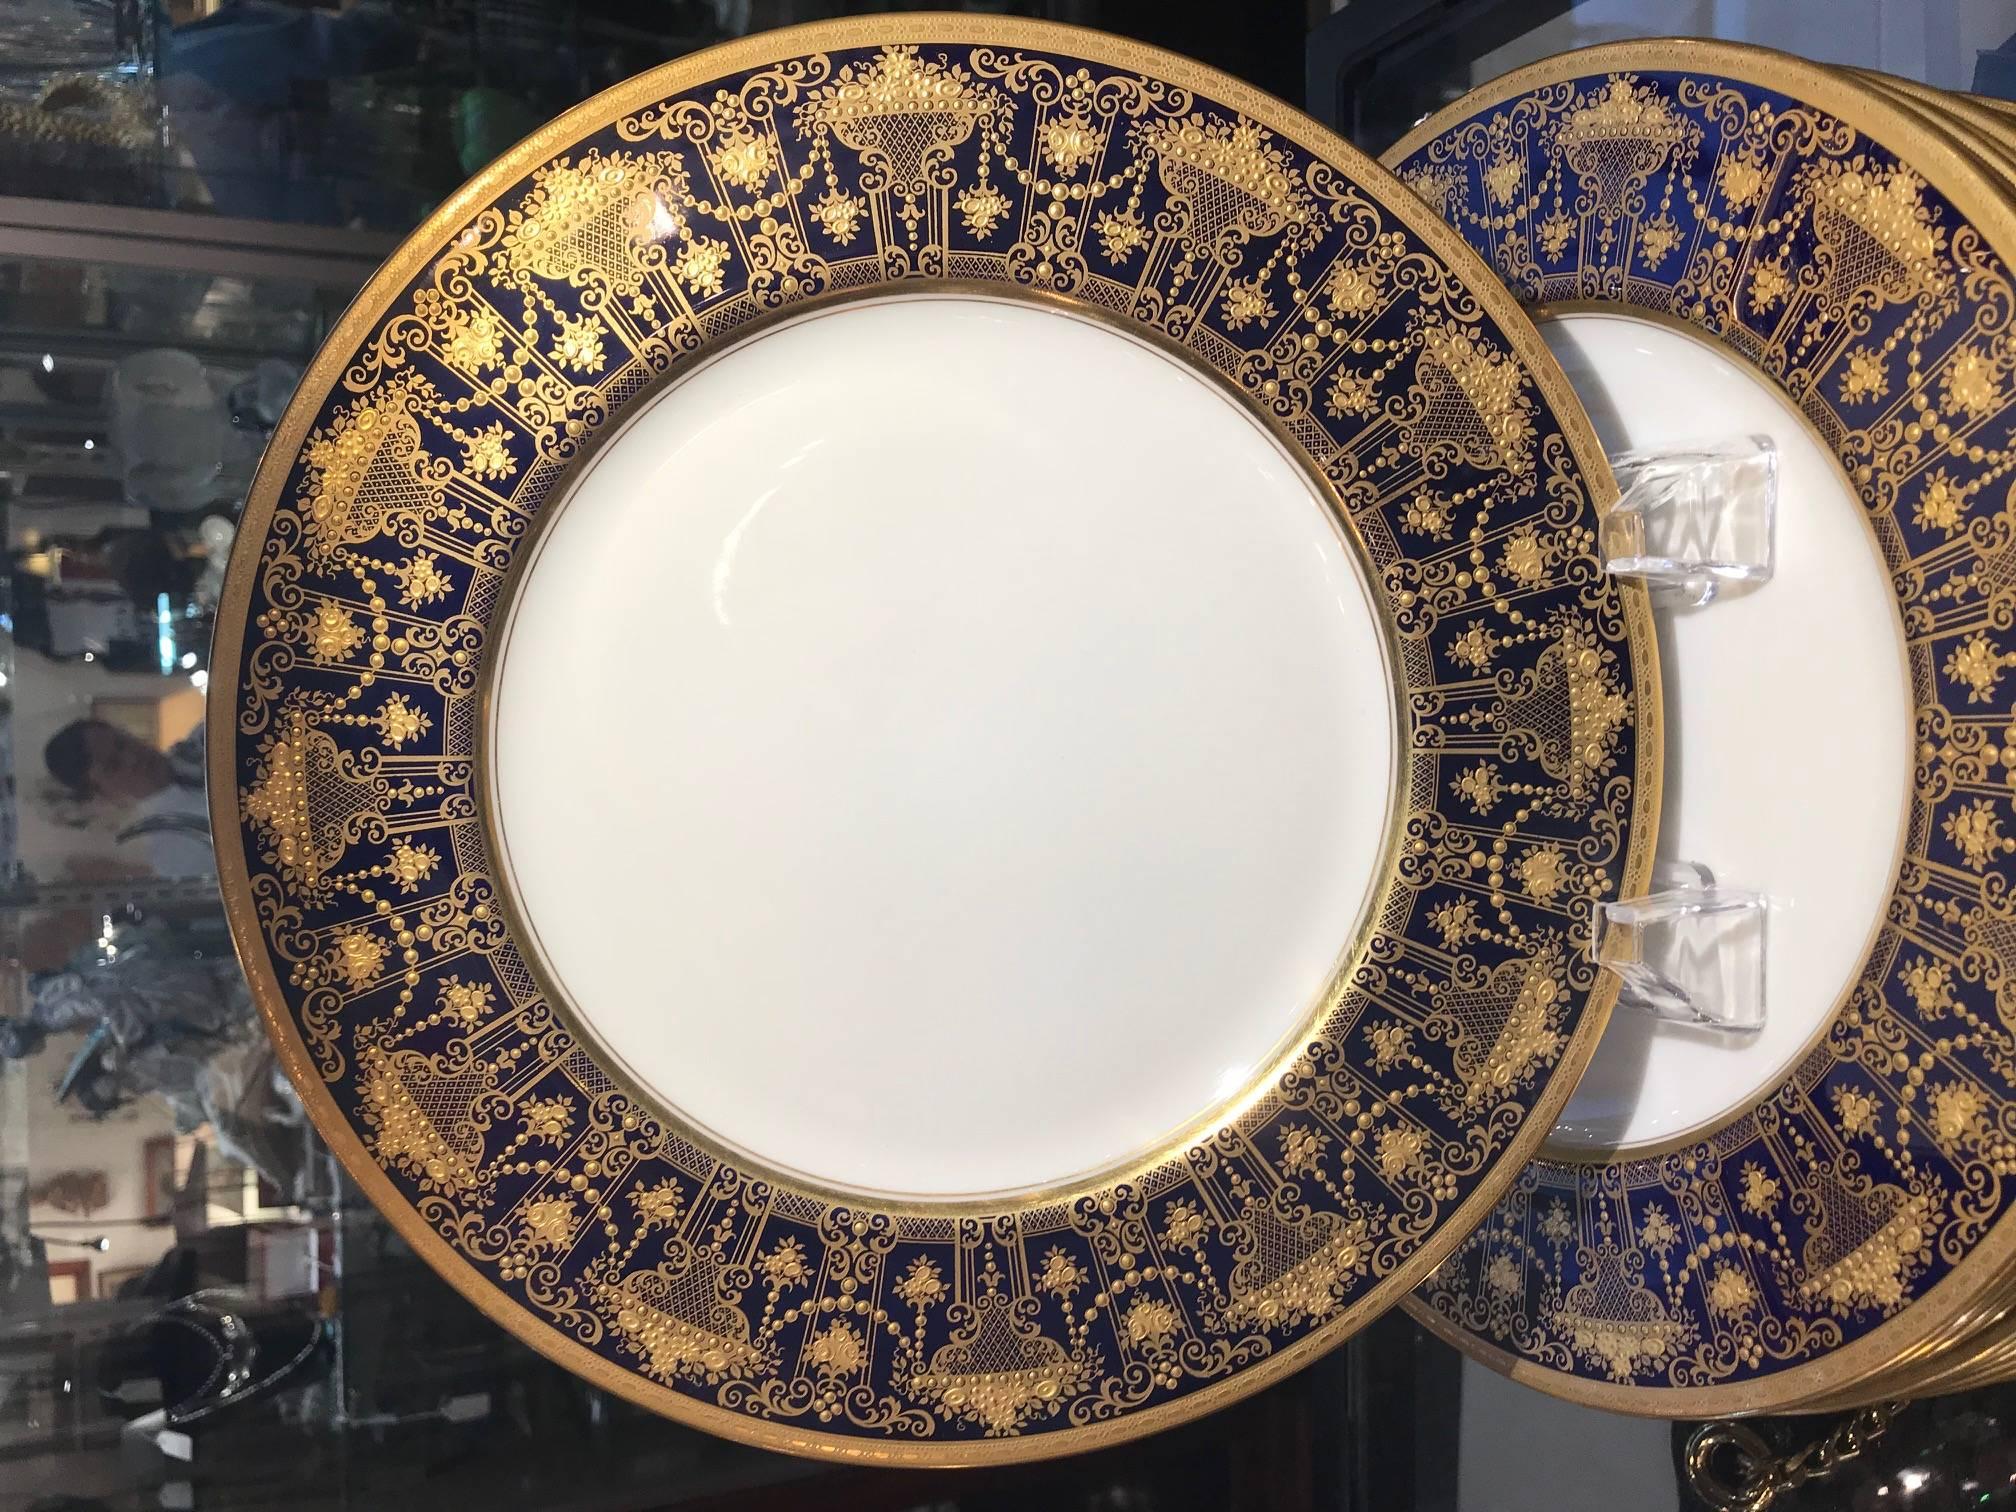 An exceptionally beautiful set of 12, circa 1910 Lenox green mark dinner plates feature a deep cobalt blue border and elaborate acid-etched gold borders. The lavish raised paste gold neoclassical garlands and arches make an elegant statement. These